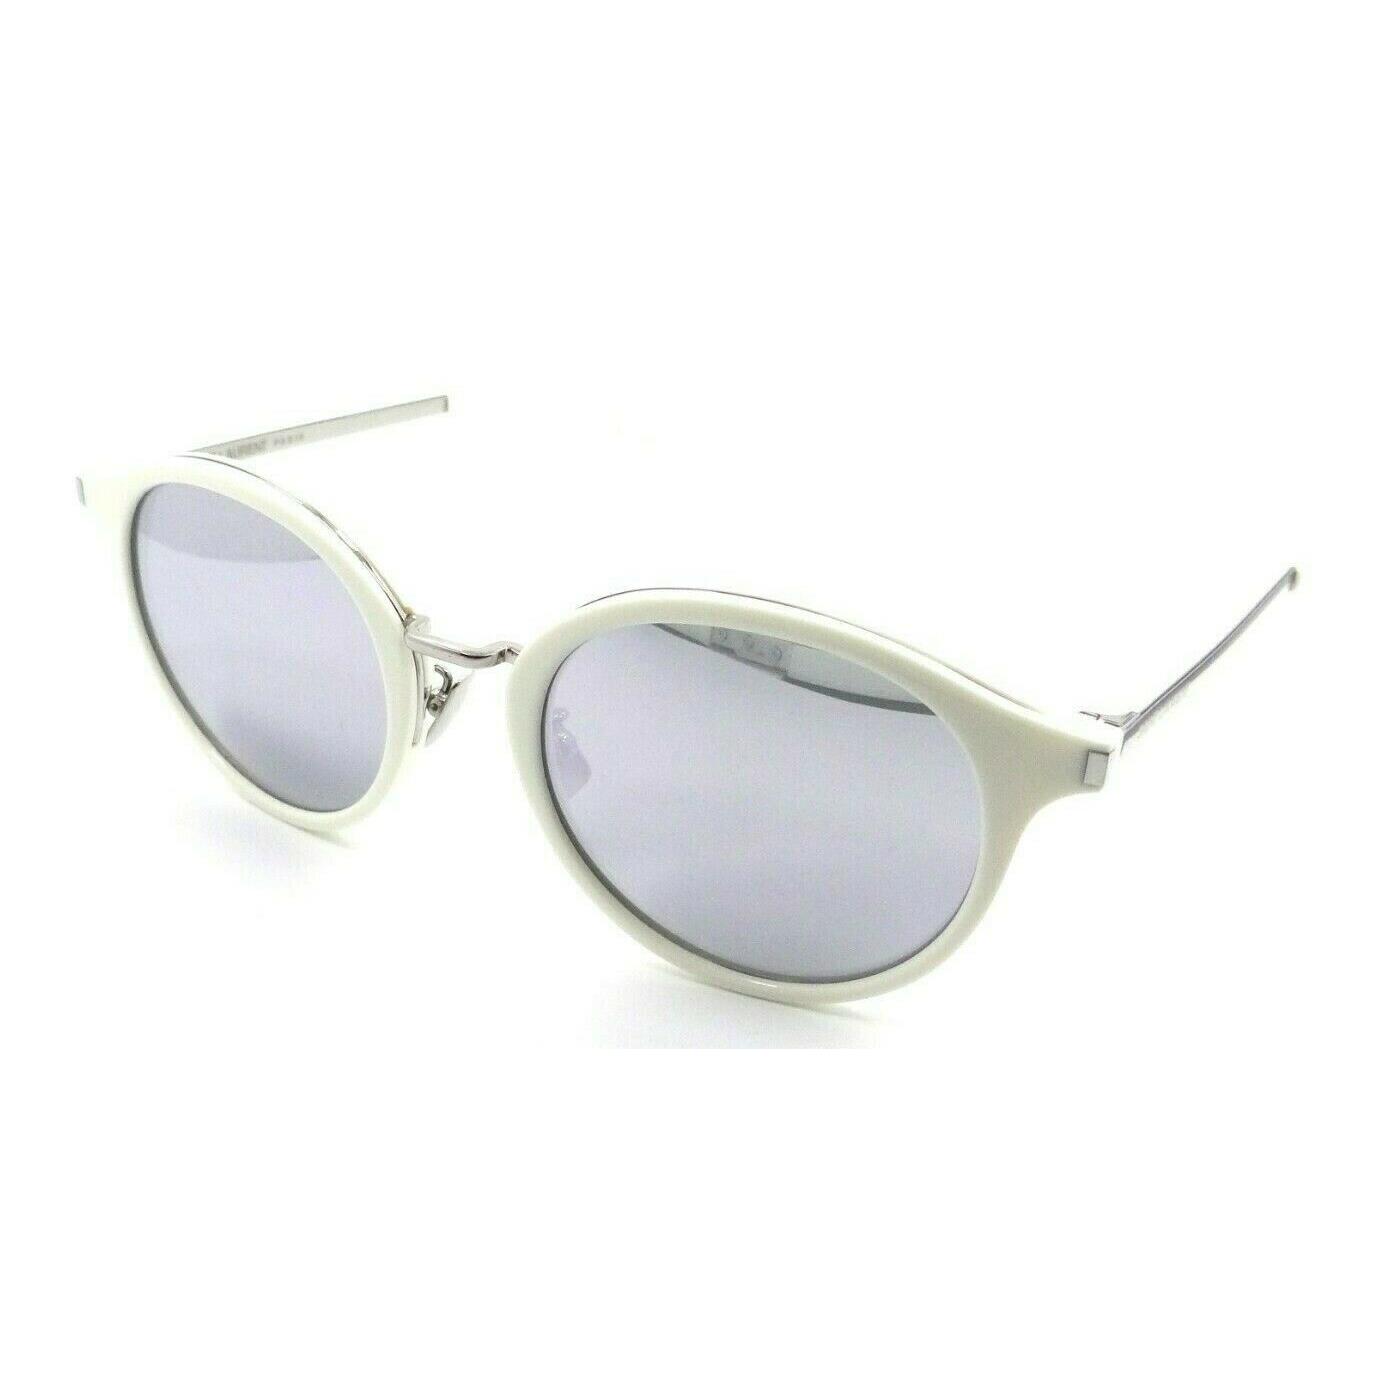 Saint Laurent Sunglasses SL 57 008 49-21-140 Ivory / Silver Mirror Made in Italy